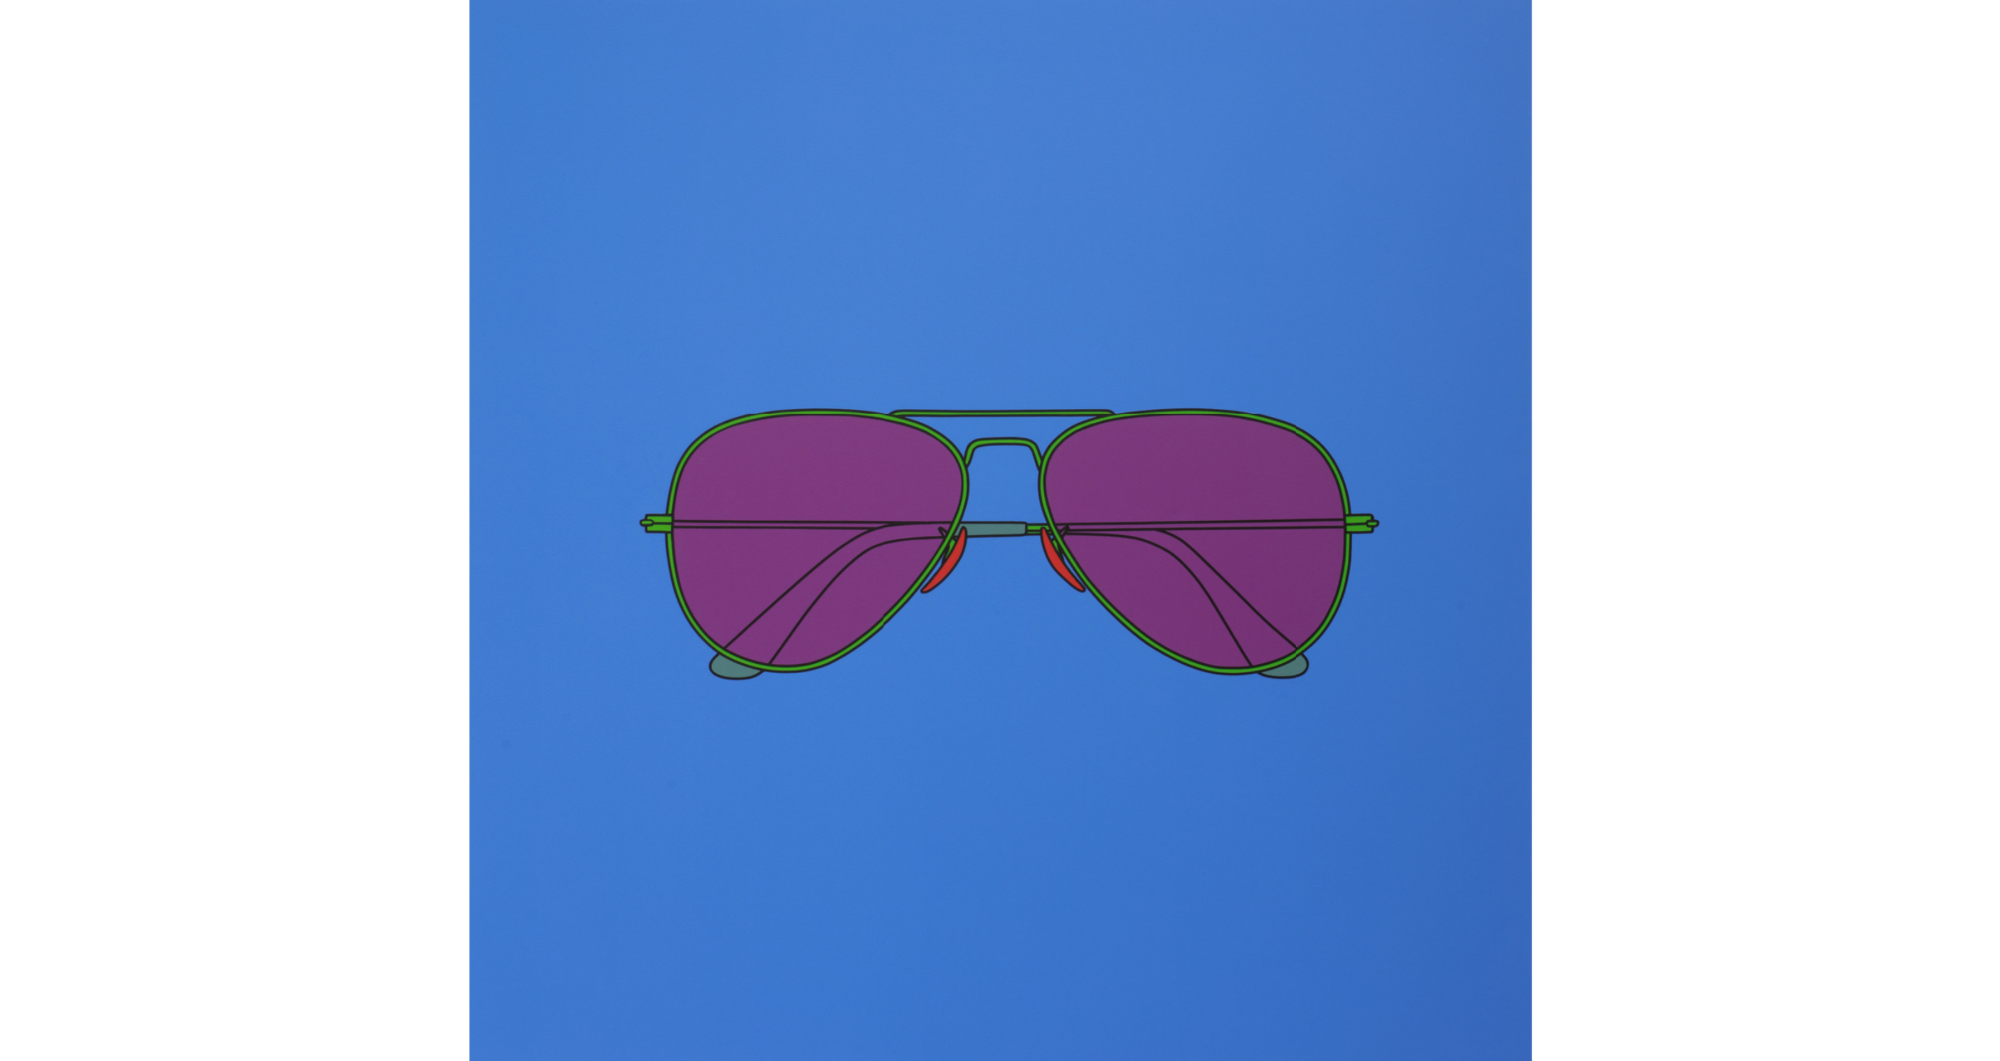 The Wick - Untitled (Sunglasses), 2021, by Michael Craig-Martin